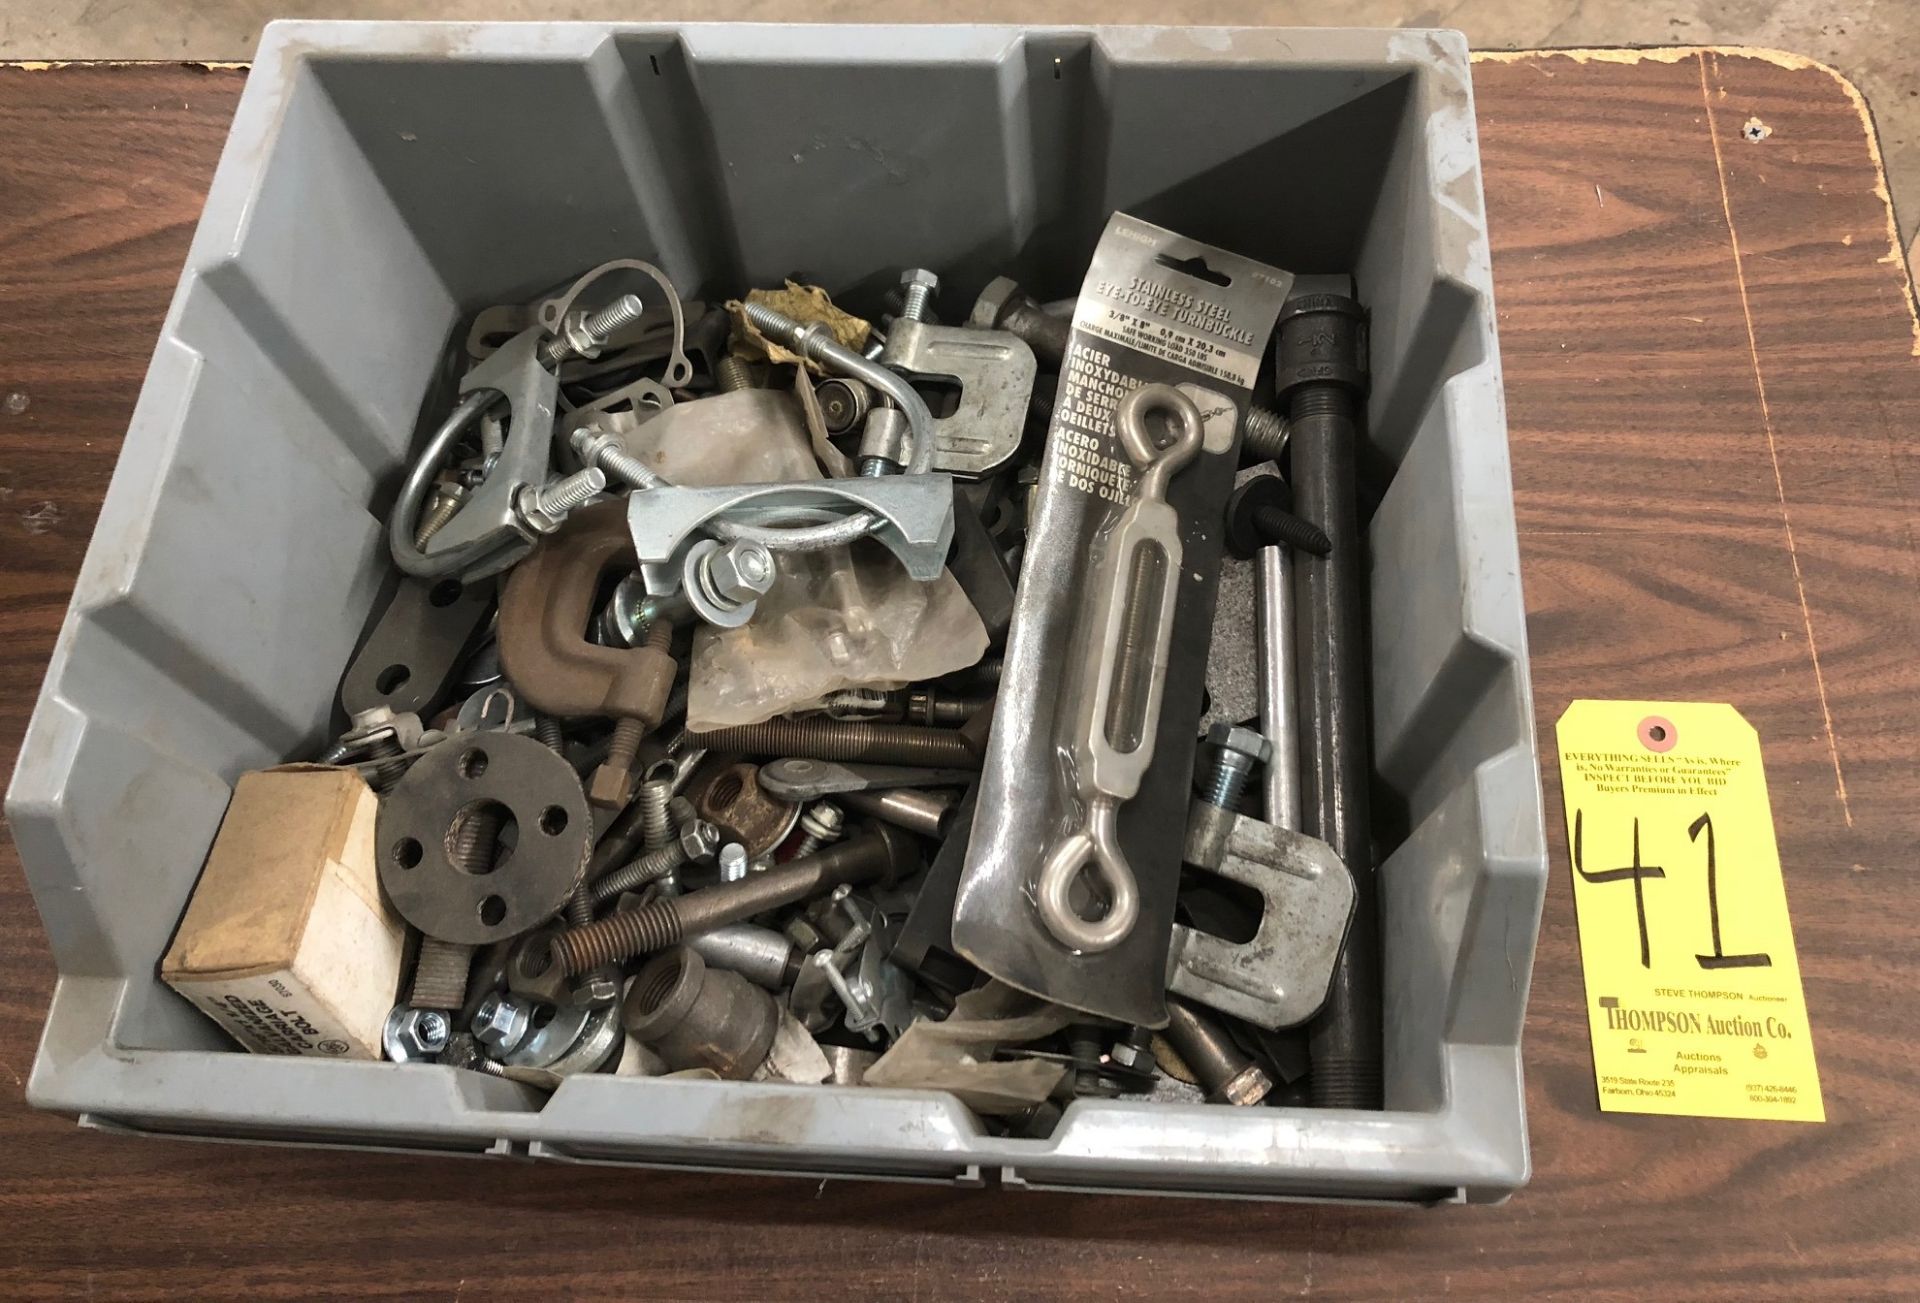 Lot, Trailer Shackles and Miscellaneous Hardware, Axle Hanger, Tumbuckle Bolt Clips, Misc. Bolts